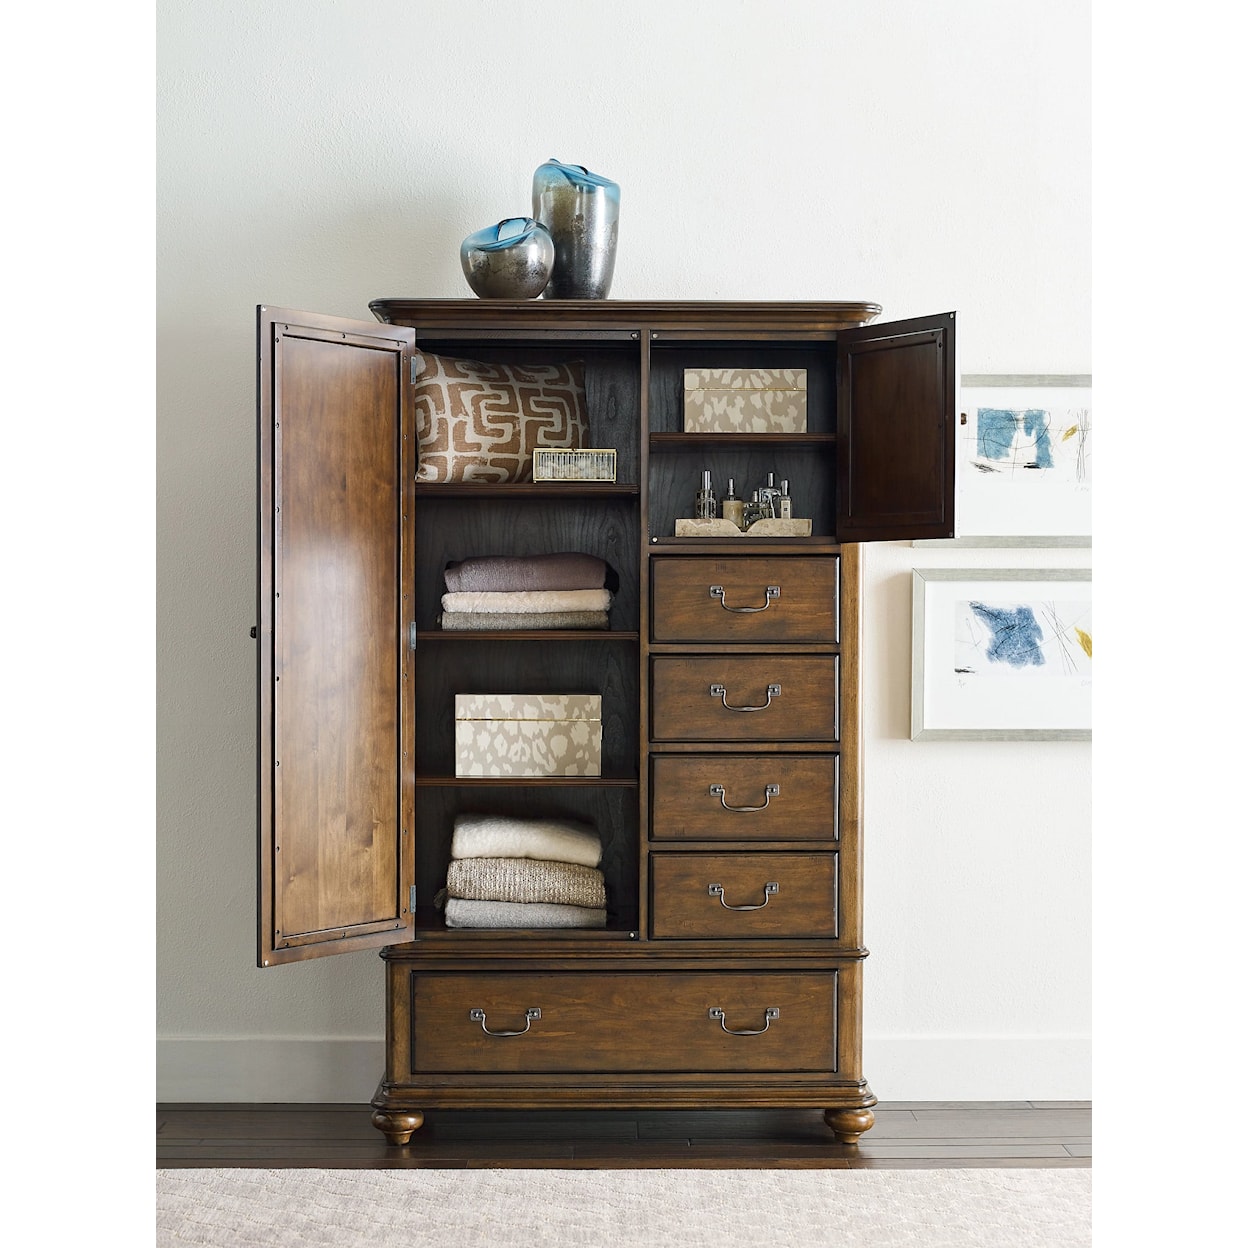 Kincaid Furniture Commonwealth Witham Gentlemen's Chest